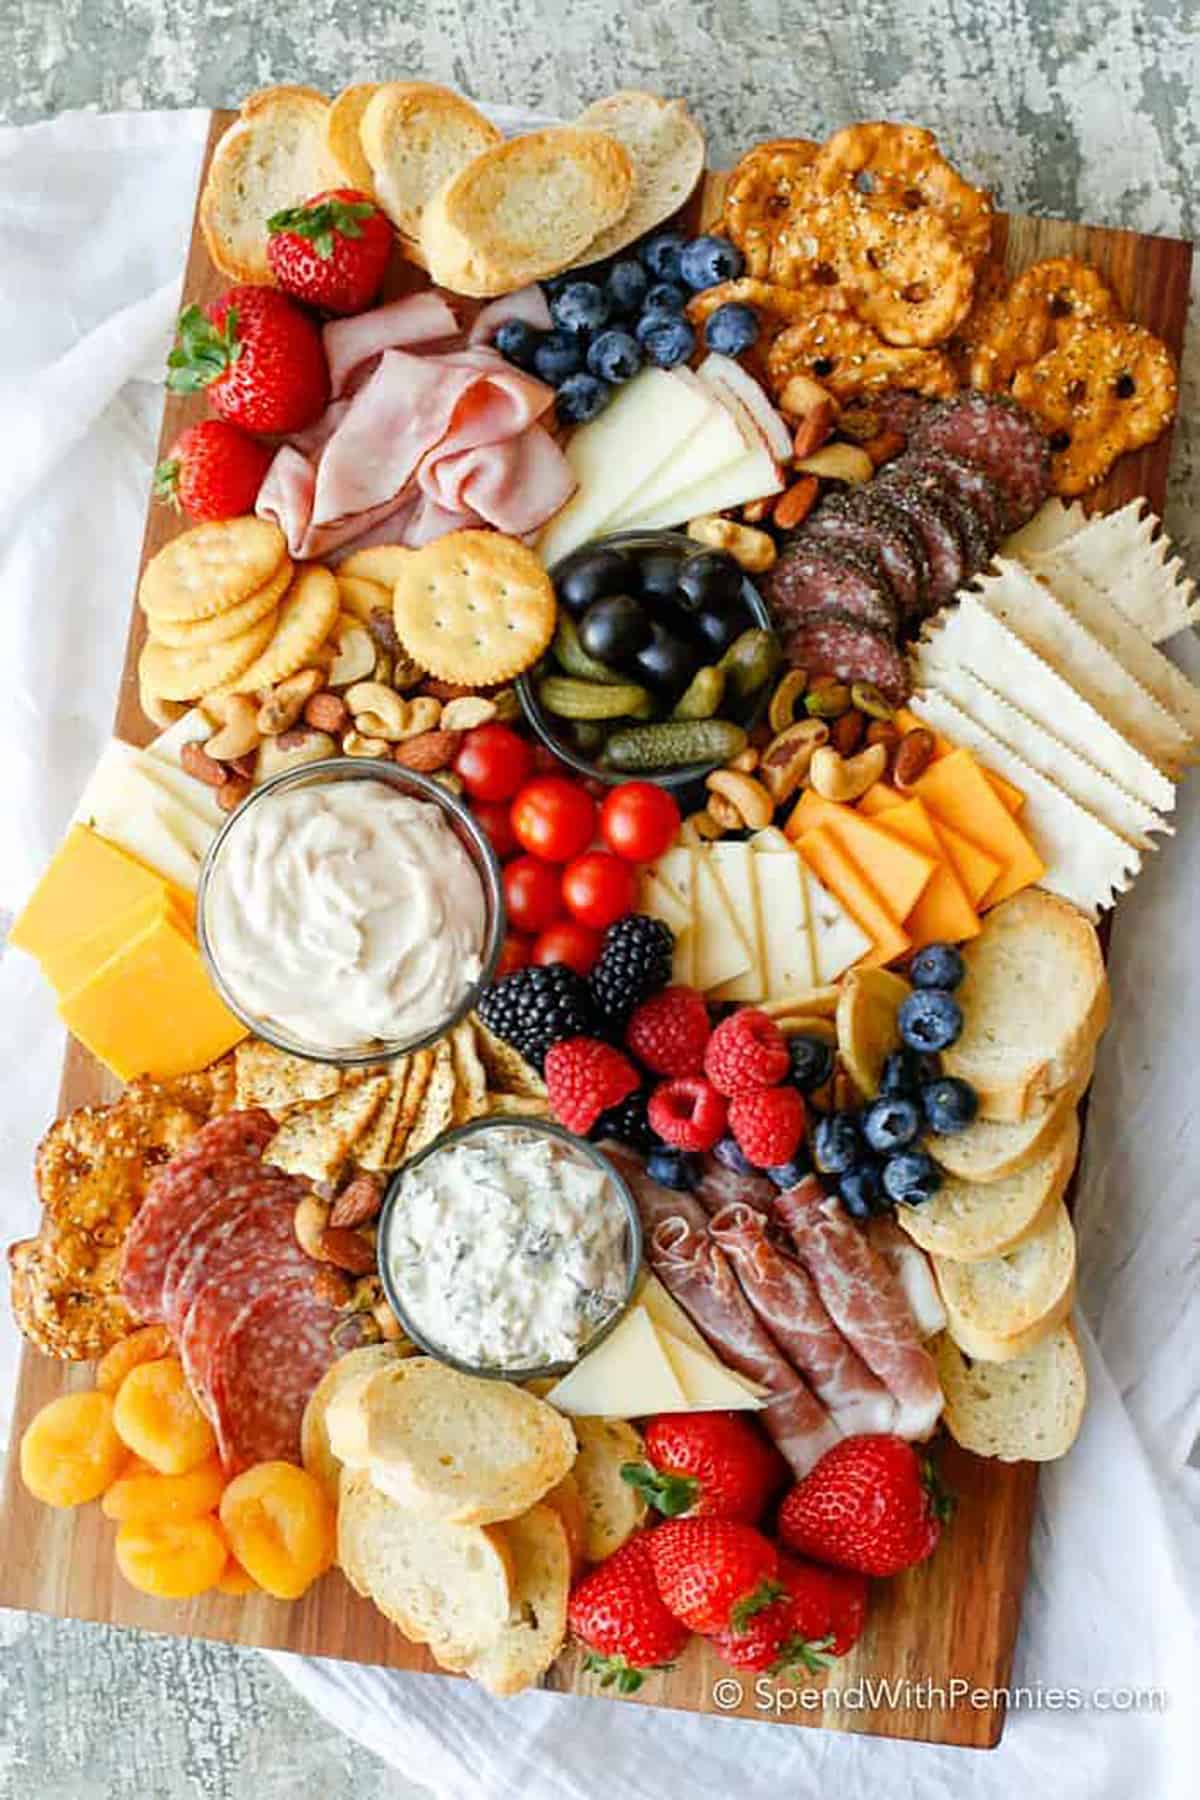 How to Make a Charcuterie Board from https://www.spendwithpennies.com/